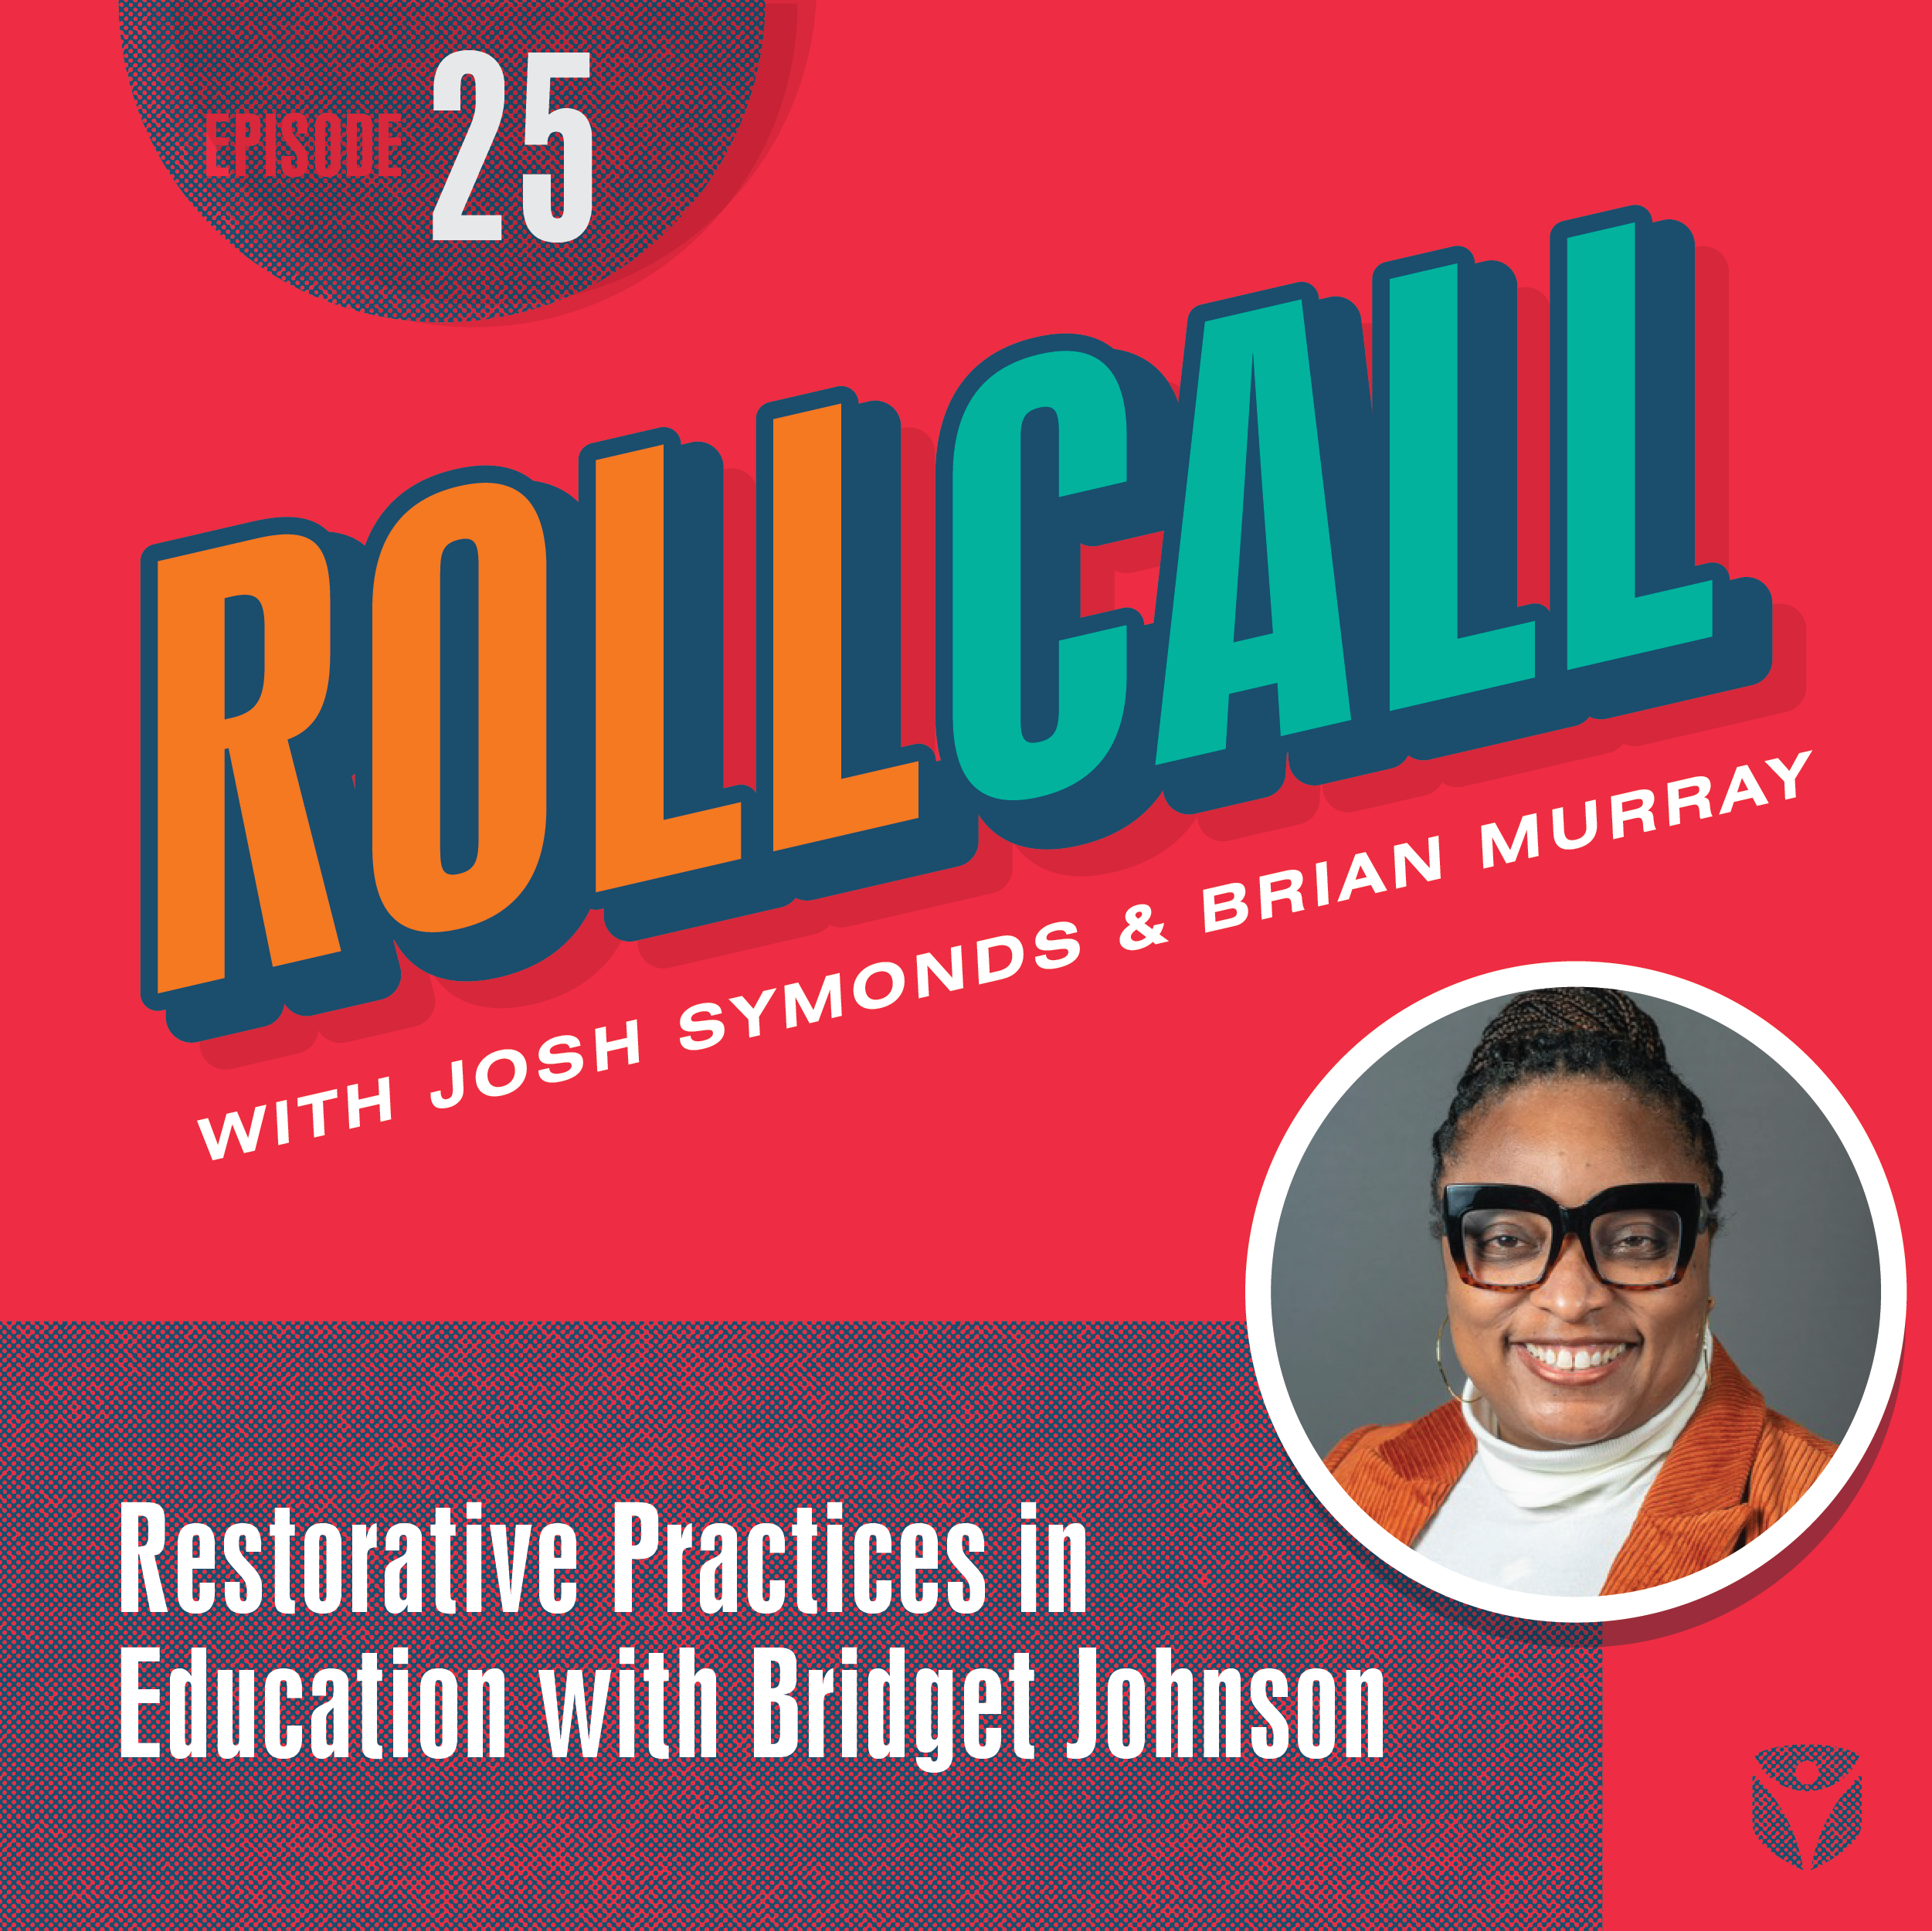 Episode 25 of the Roll Call Podcast is now live! Join Brian Murray and Joshua Symonds, EdD as they discuss Restorative Practice and Restorative Justice in Schools with Bridget Johnson, Co-founder of The Dean’s Roundtable and former Dean of students herself.